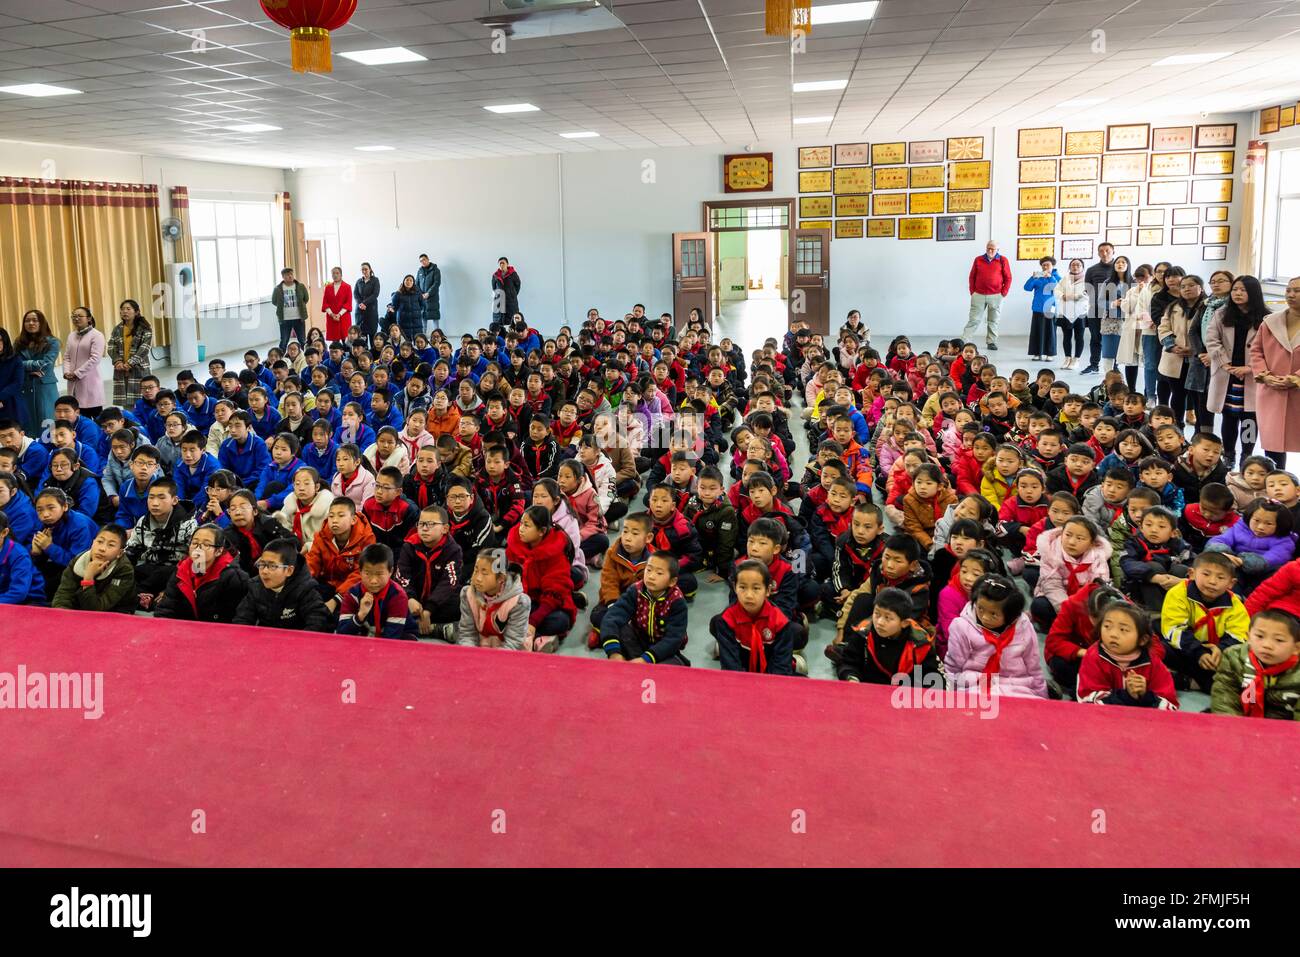 Students at BoAi school prepare for an assembly in a rural school in Shanxi province, China. Stock Photo